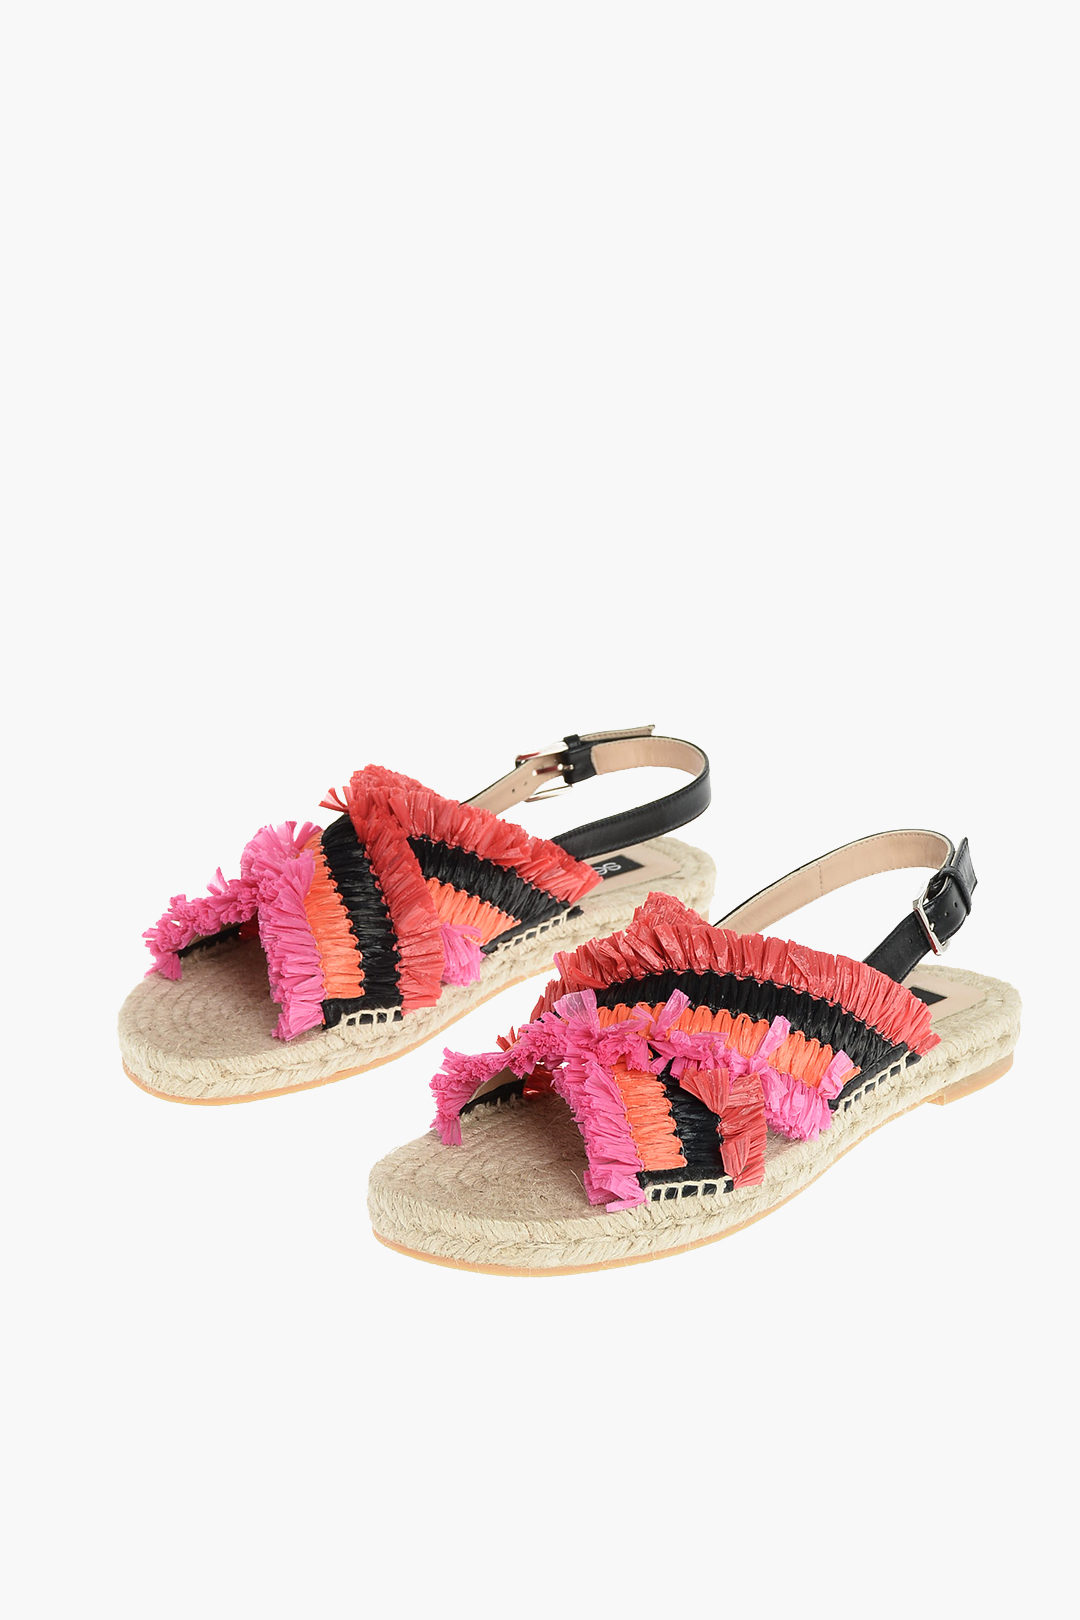 geloof rouw noot Sergio Rossi Rafia Sandals KAUAI with Rope Sole women - Glamood Outlet